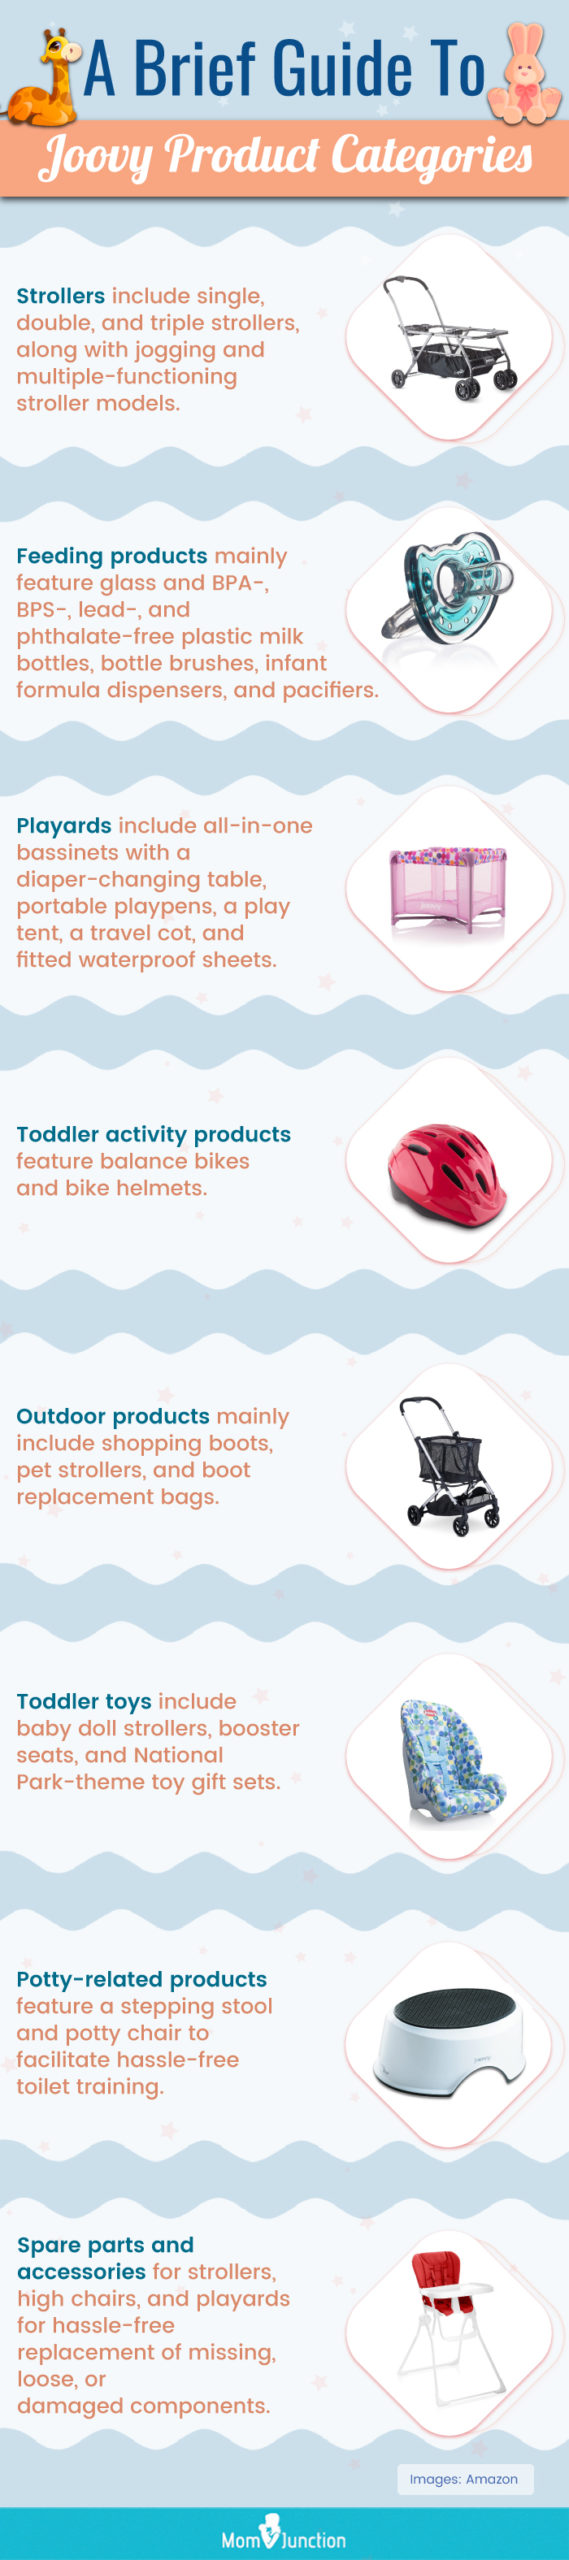 A Brief Guide To Joovy Product Categories (infographic)